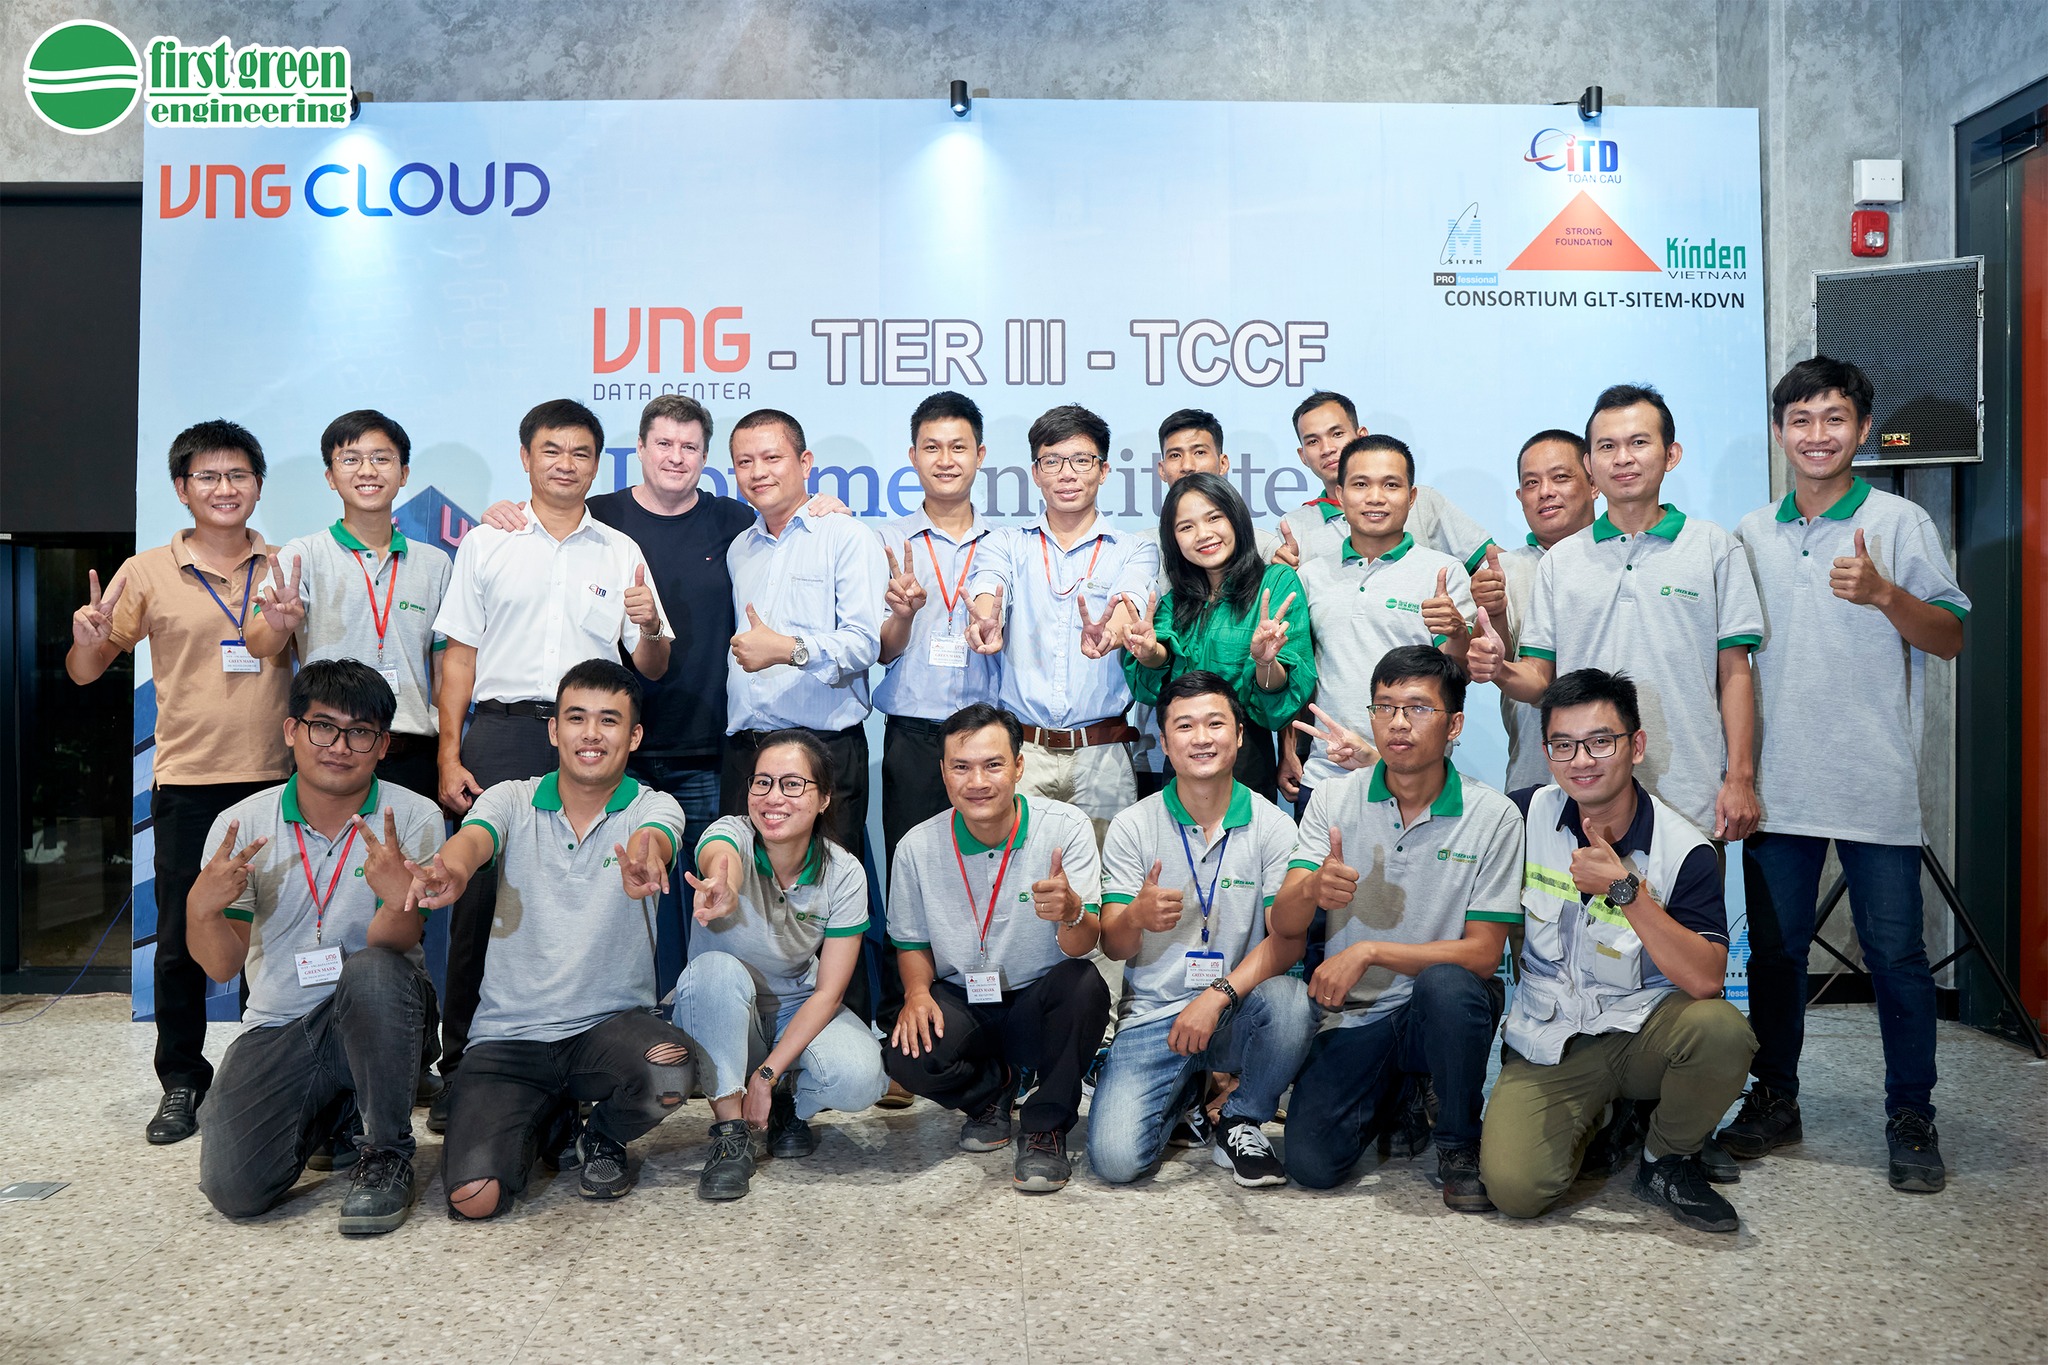 FIRST GREEN ENGINEERING OFFICIALLY COMPLETED THE TCCF TEST OF UPTIME INSTITUTE